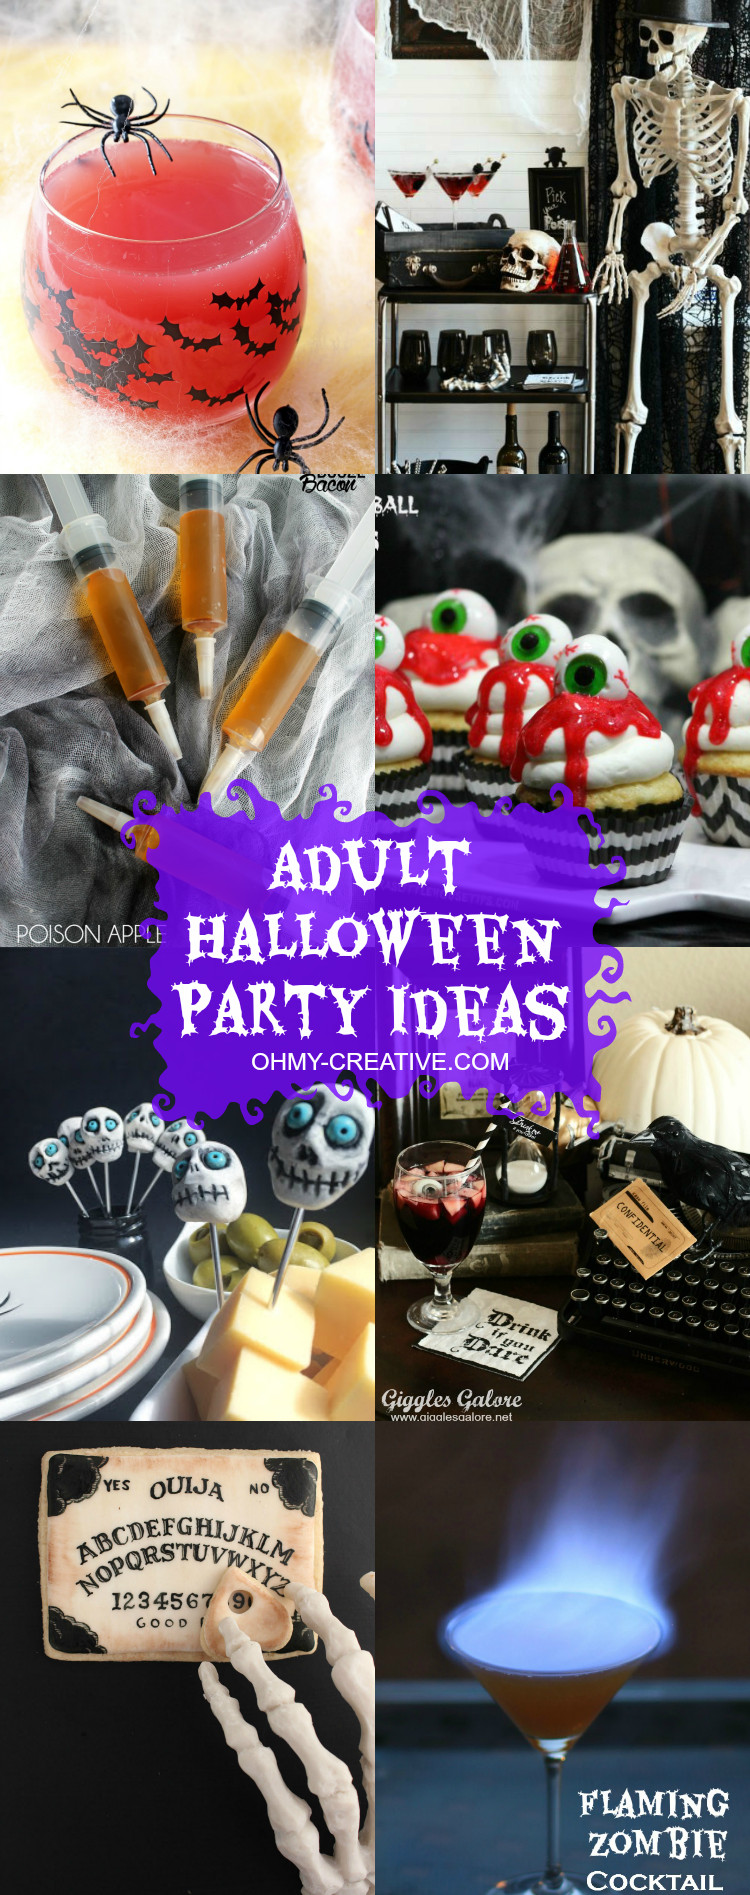 Halloween Costume Party Ideas For Adults
 Adult Halloween Party Ideas Page 2 of 29 Oh My Creative